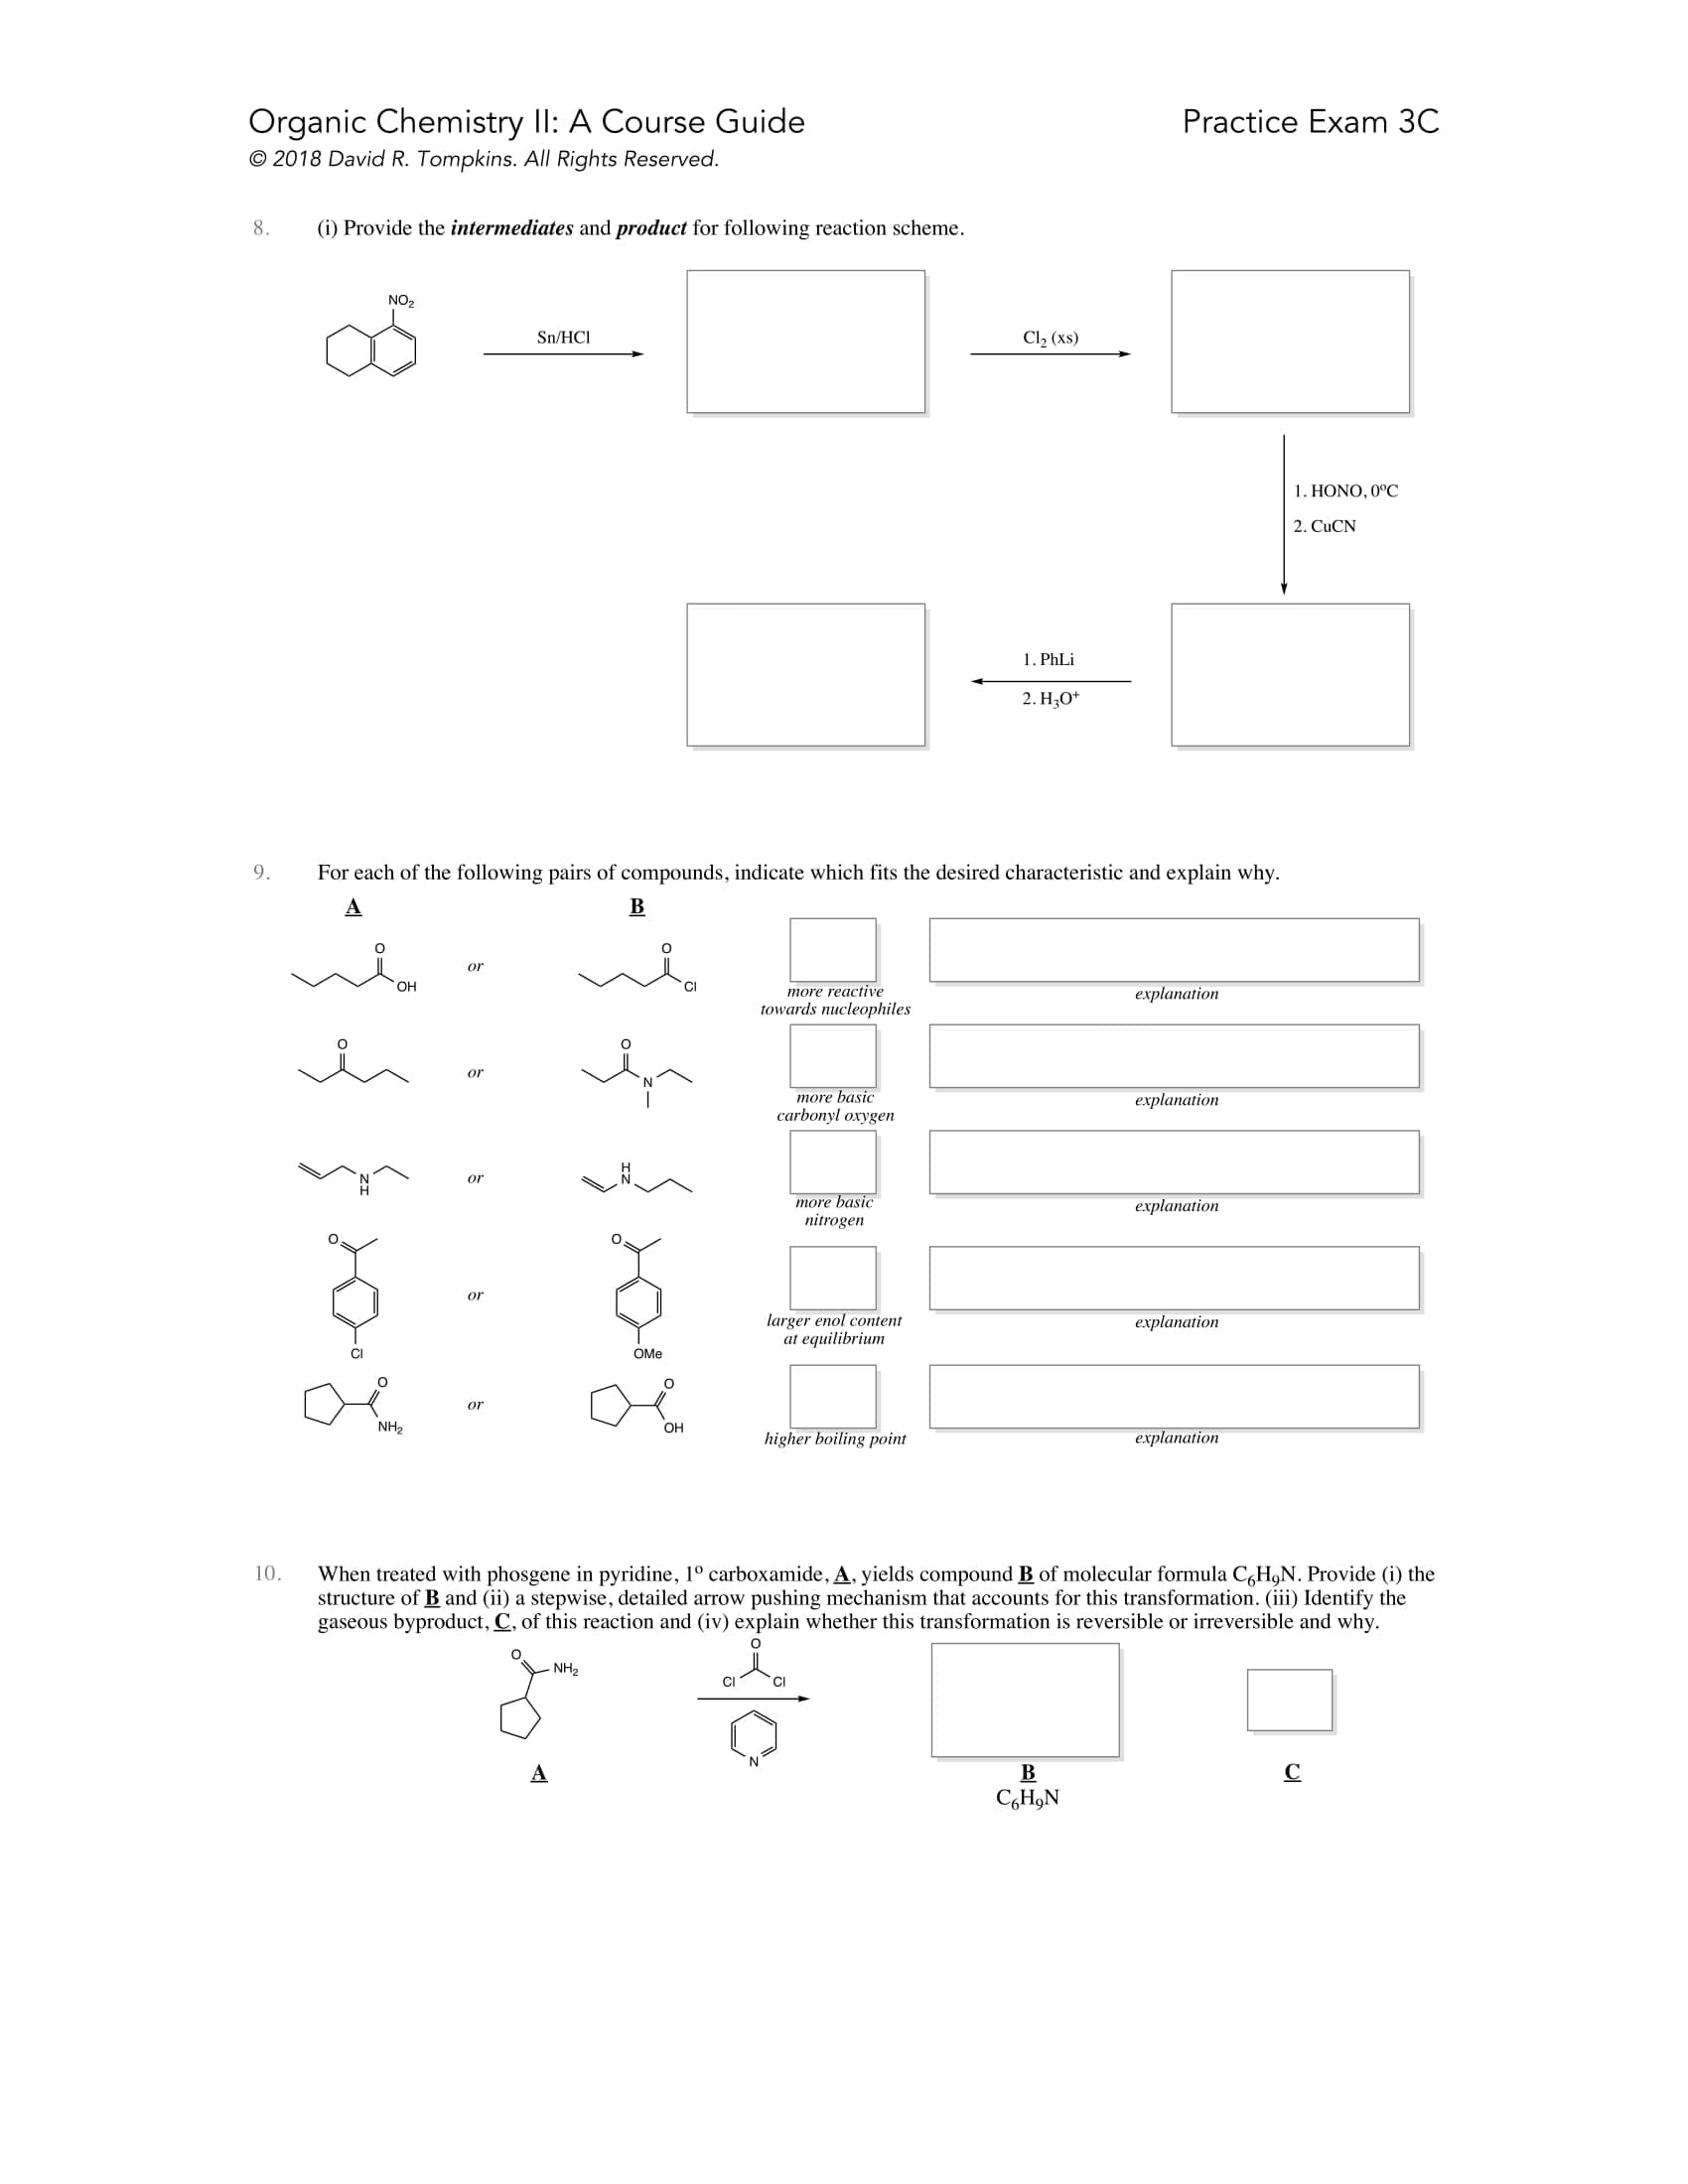 Introduction to Organic II Chemistry (Duke) Course Guide Example Page 1